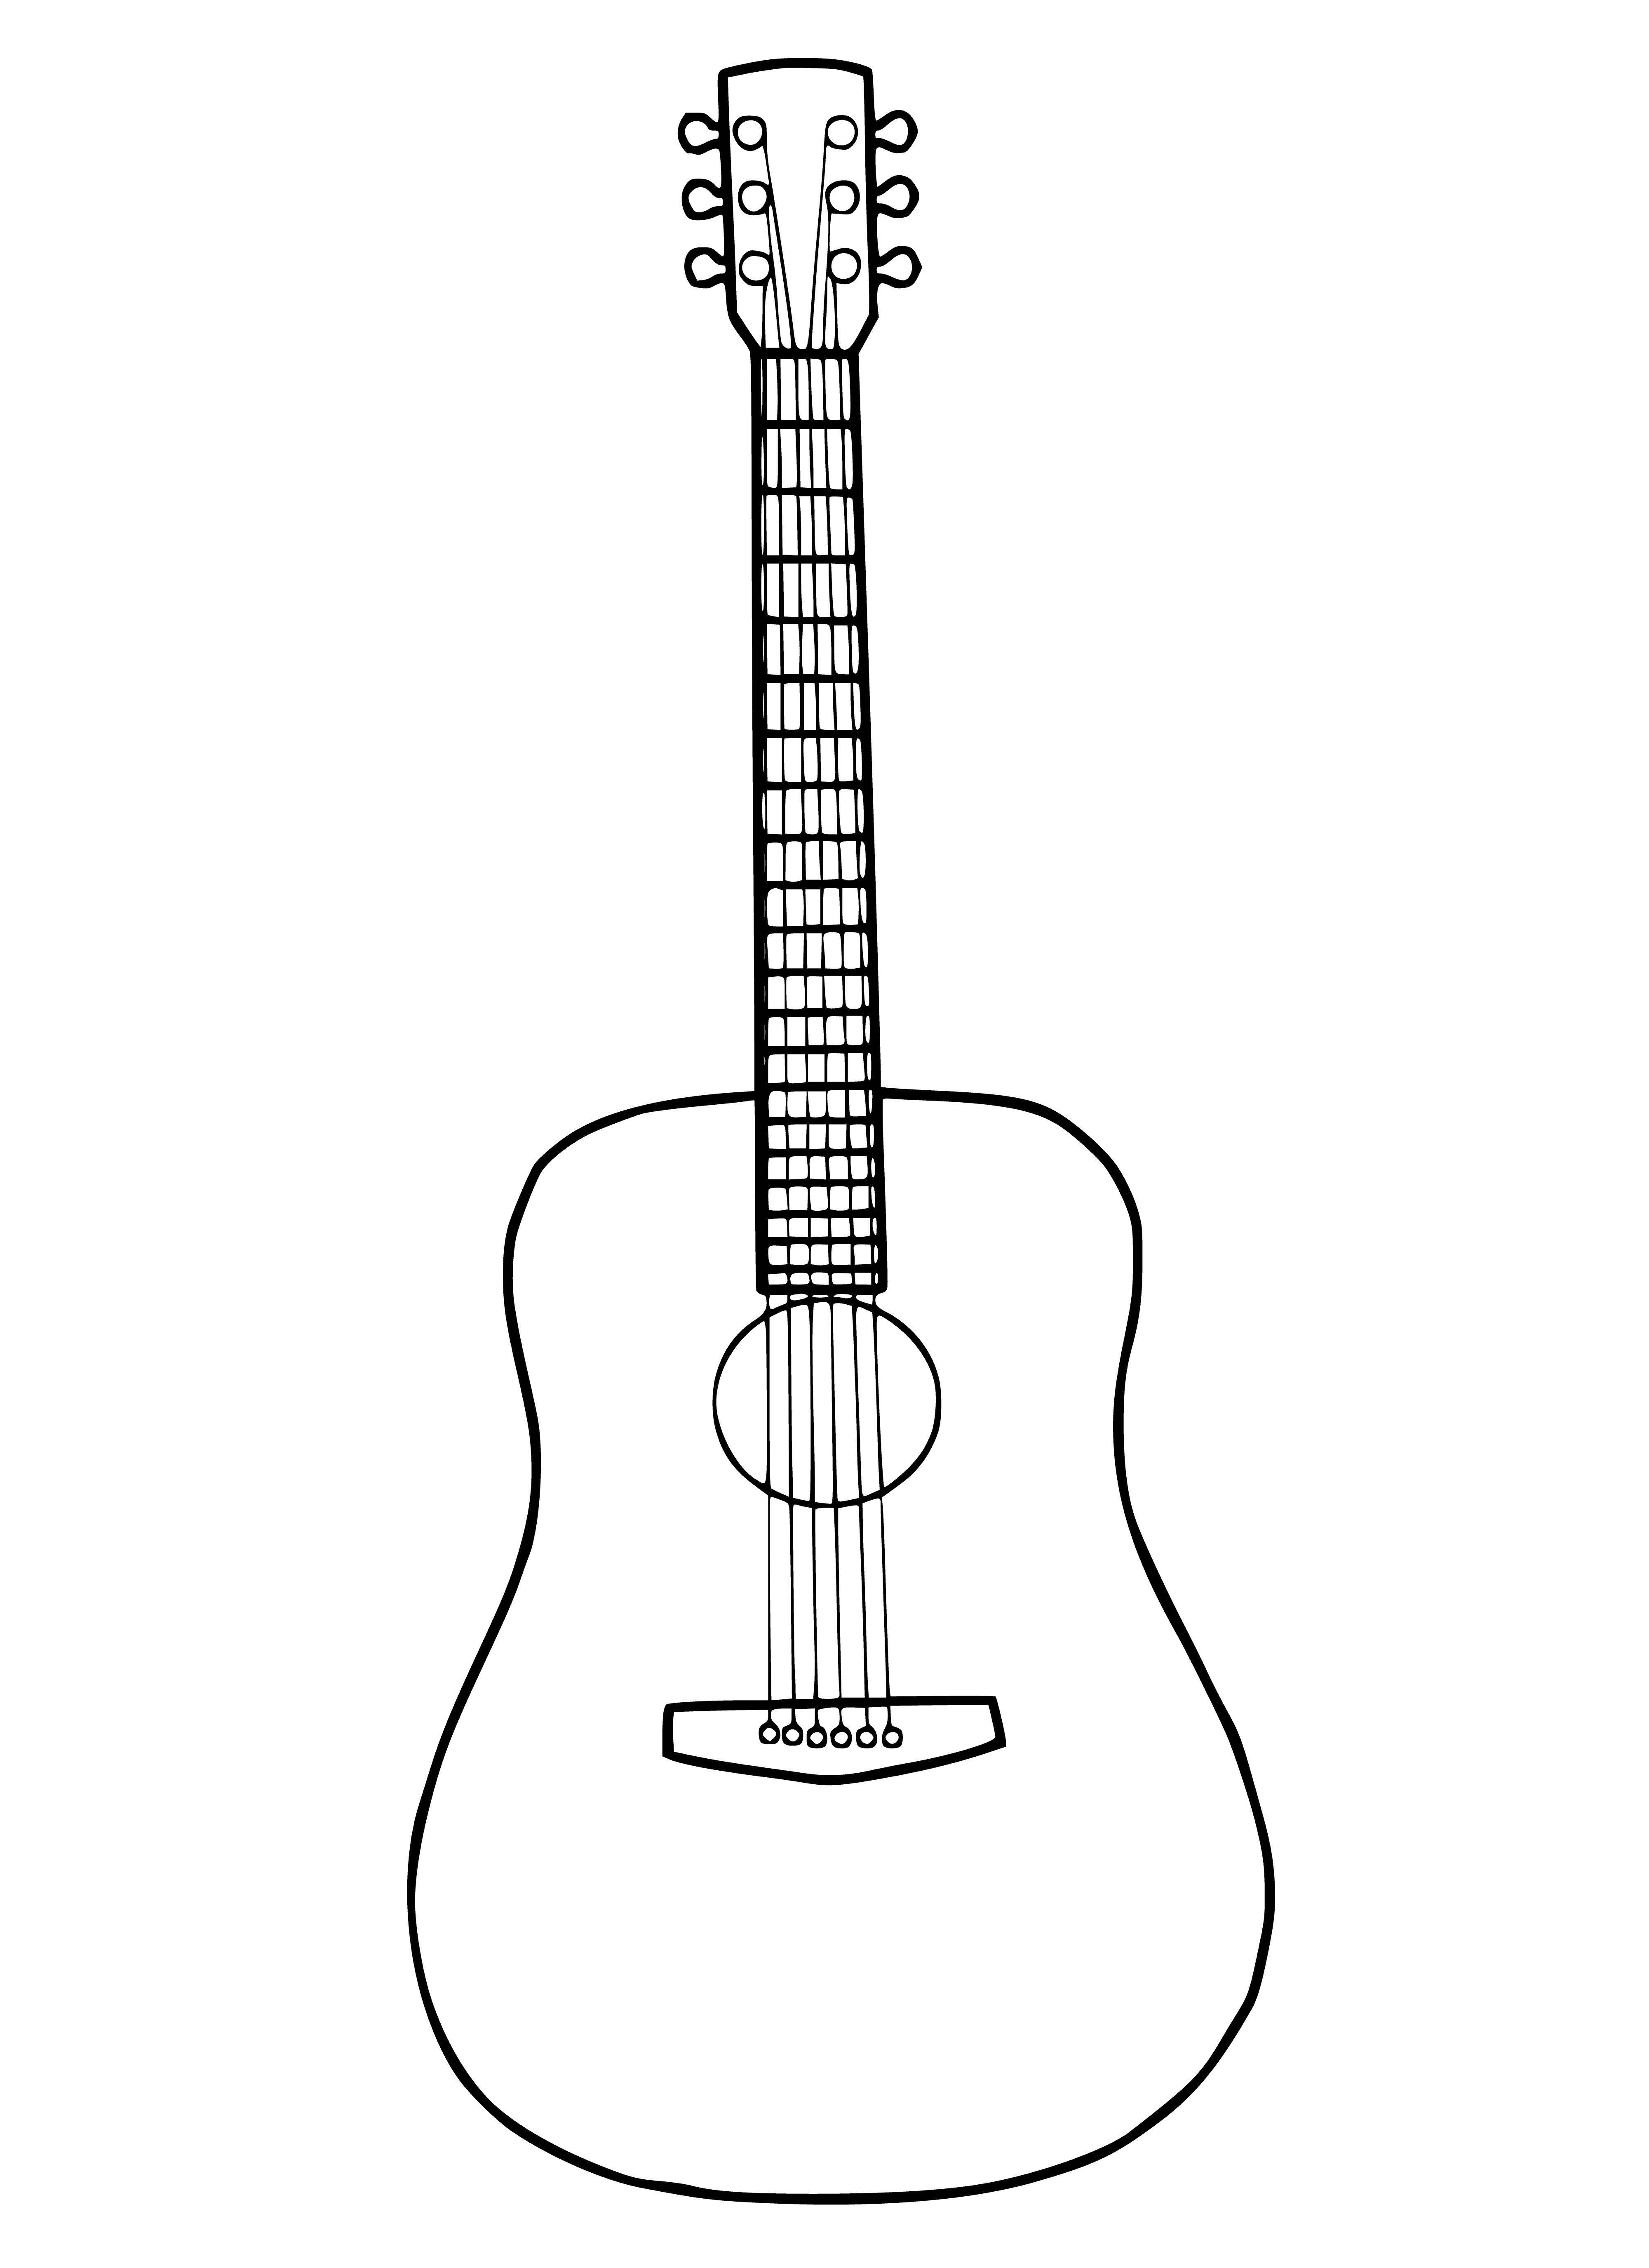 Guitar coloring page